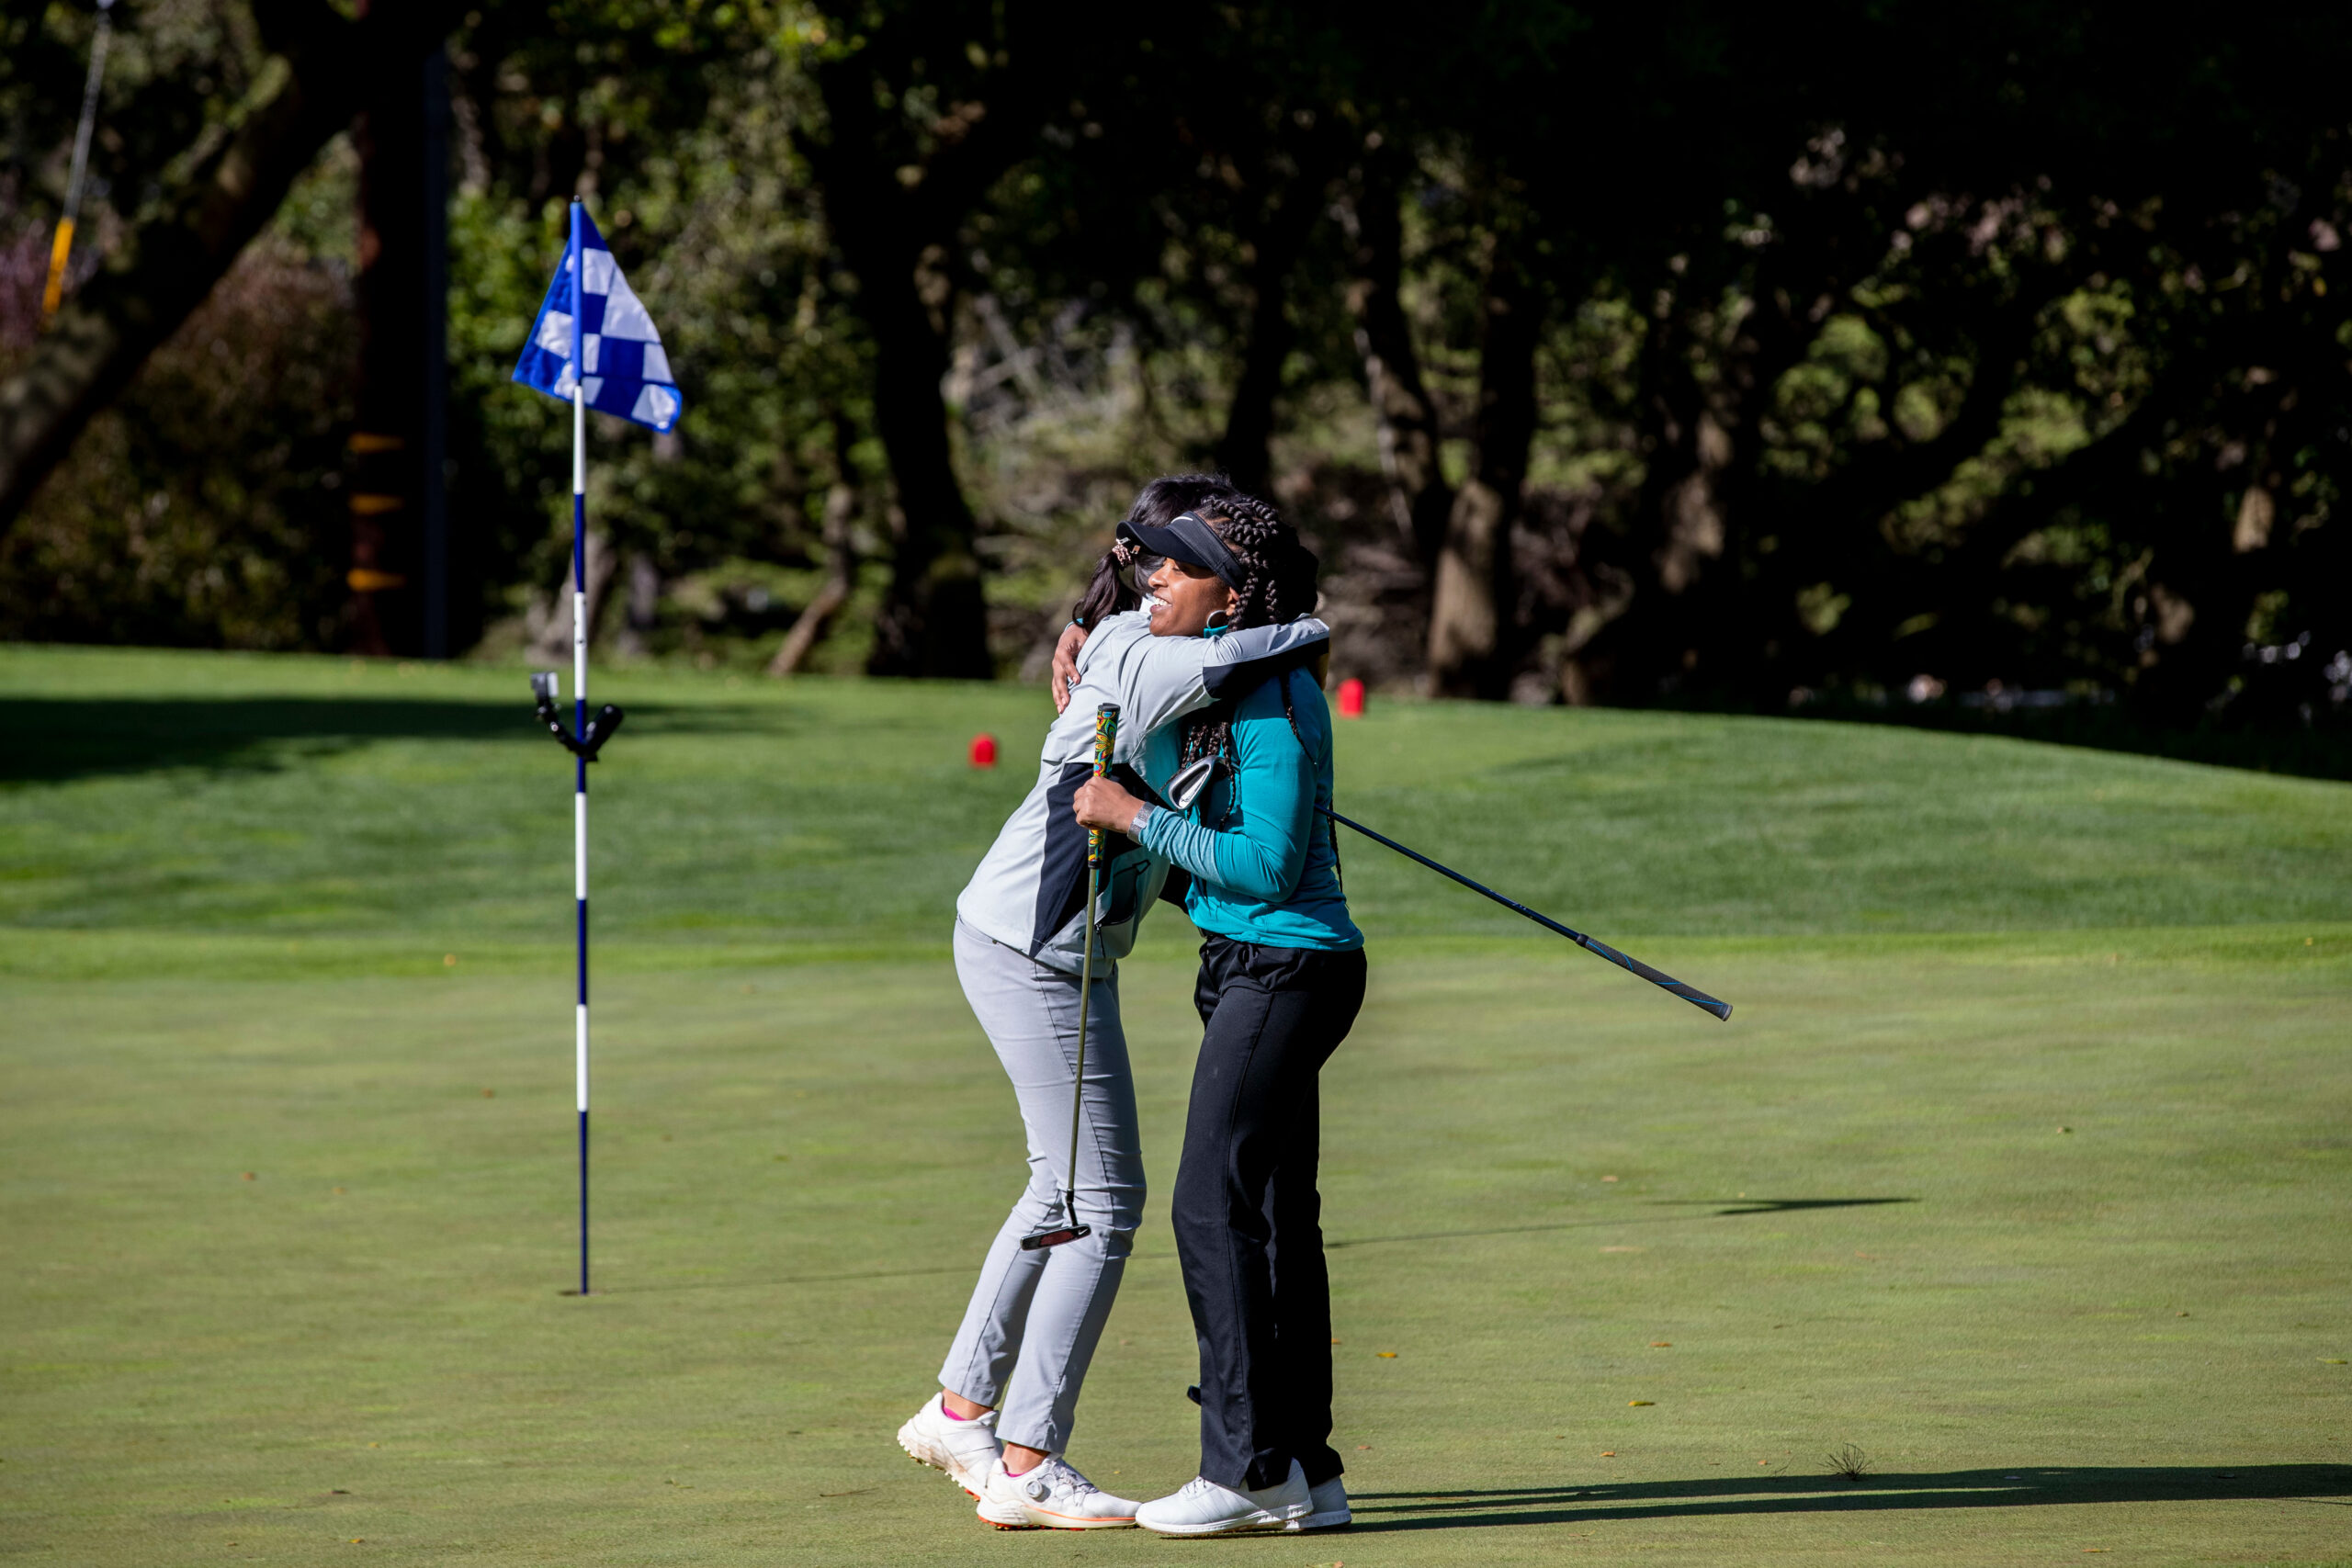 Participants hugging on a putting green.